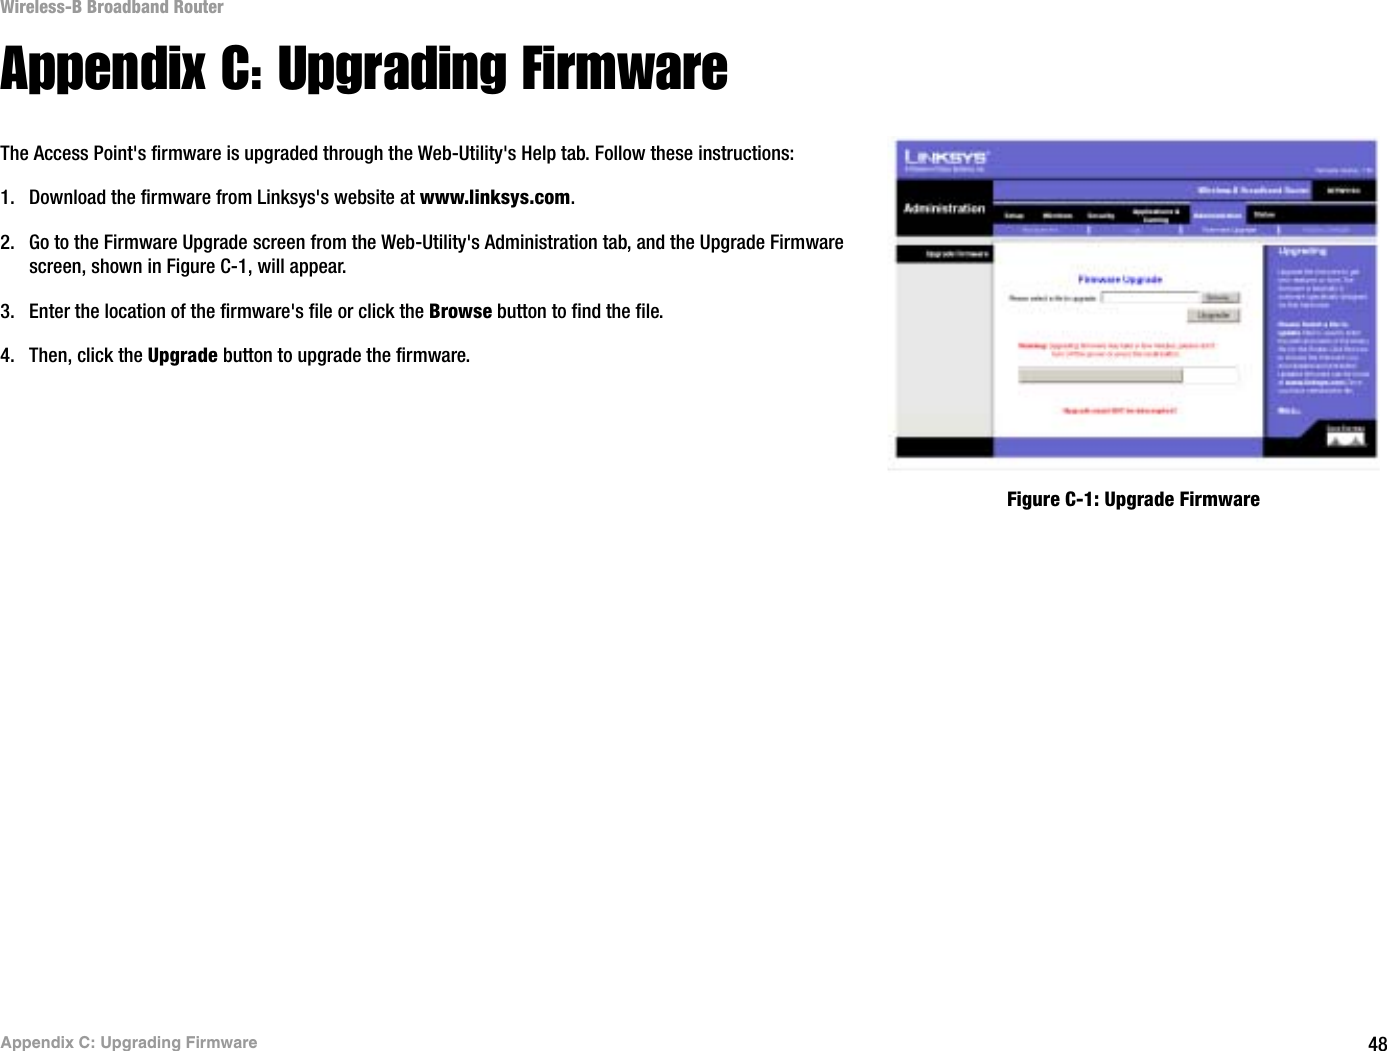 48Appendix C: Upgrading FirmwareWireless-B Broadband RouterAppendix C: Upgrading FirmwareThe Access Point&apos;s firmware is upgraded through the Web-Utility&apos;s Help tab. Follow these instructions:1. Download the firmware from Linksys&apos;s website at www.linksys.com.2. Go to the Firmware Upgrade screen from the Web-Utility&apos;s Administration tab, and the Upgrade Firmware screen, shown in Figure C-1, will appear.3. Enter the location of the firmware&apos;s file or click the Browse button to find the file. 4. Then, click the Upgrade button to upgrade the firmware.Figure C-1: Upgrade Firmware